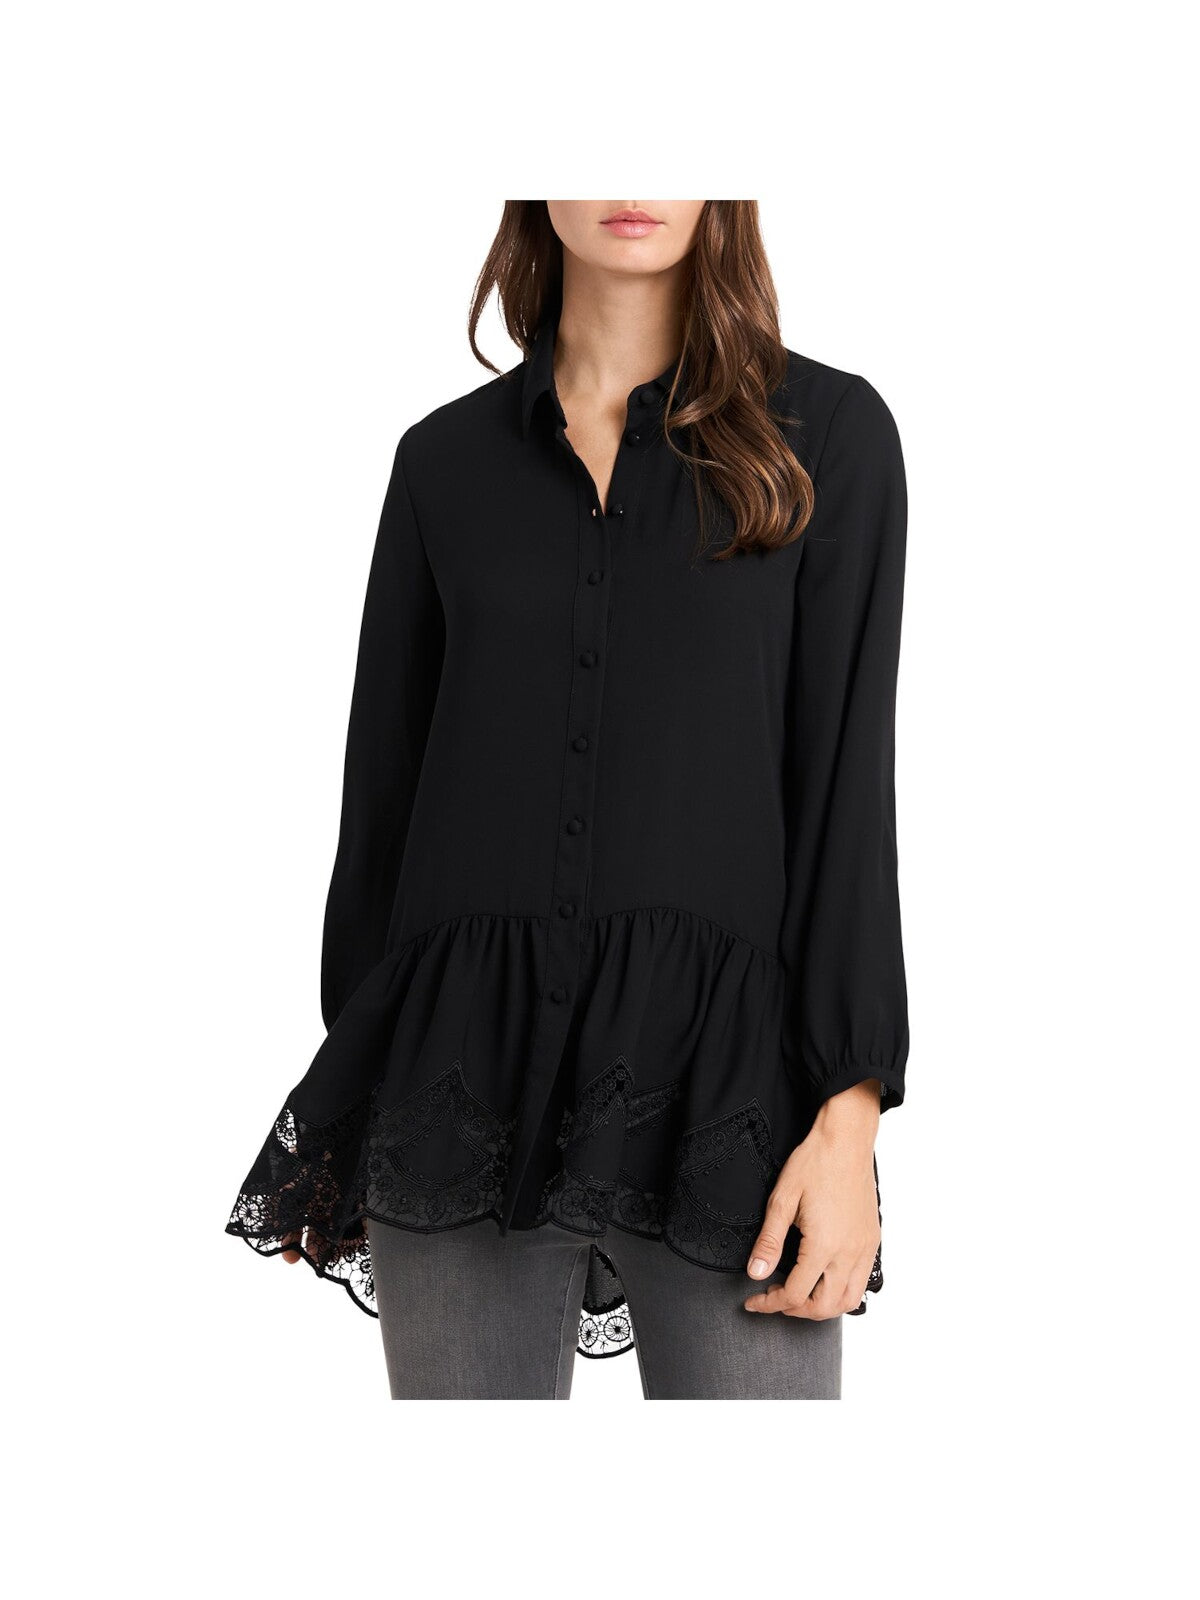 VINCE CAMUTO Womens Black Sheer Lace Trimmed Button Down Cuffed Sleeve Collared Wear To Work Tunic Top S